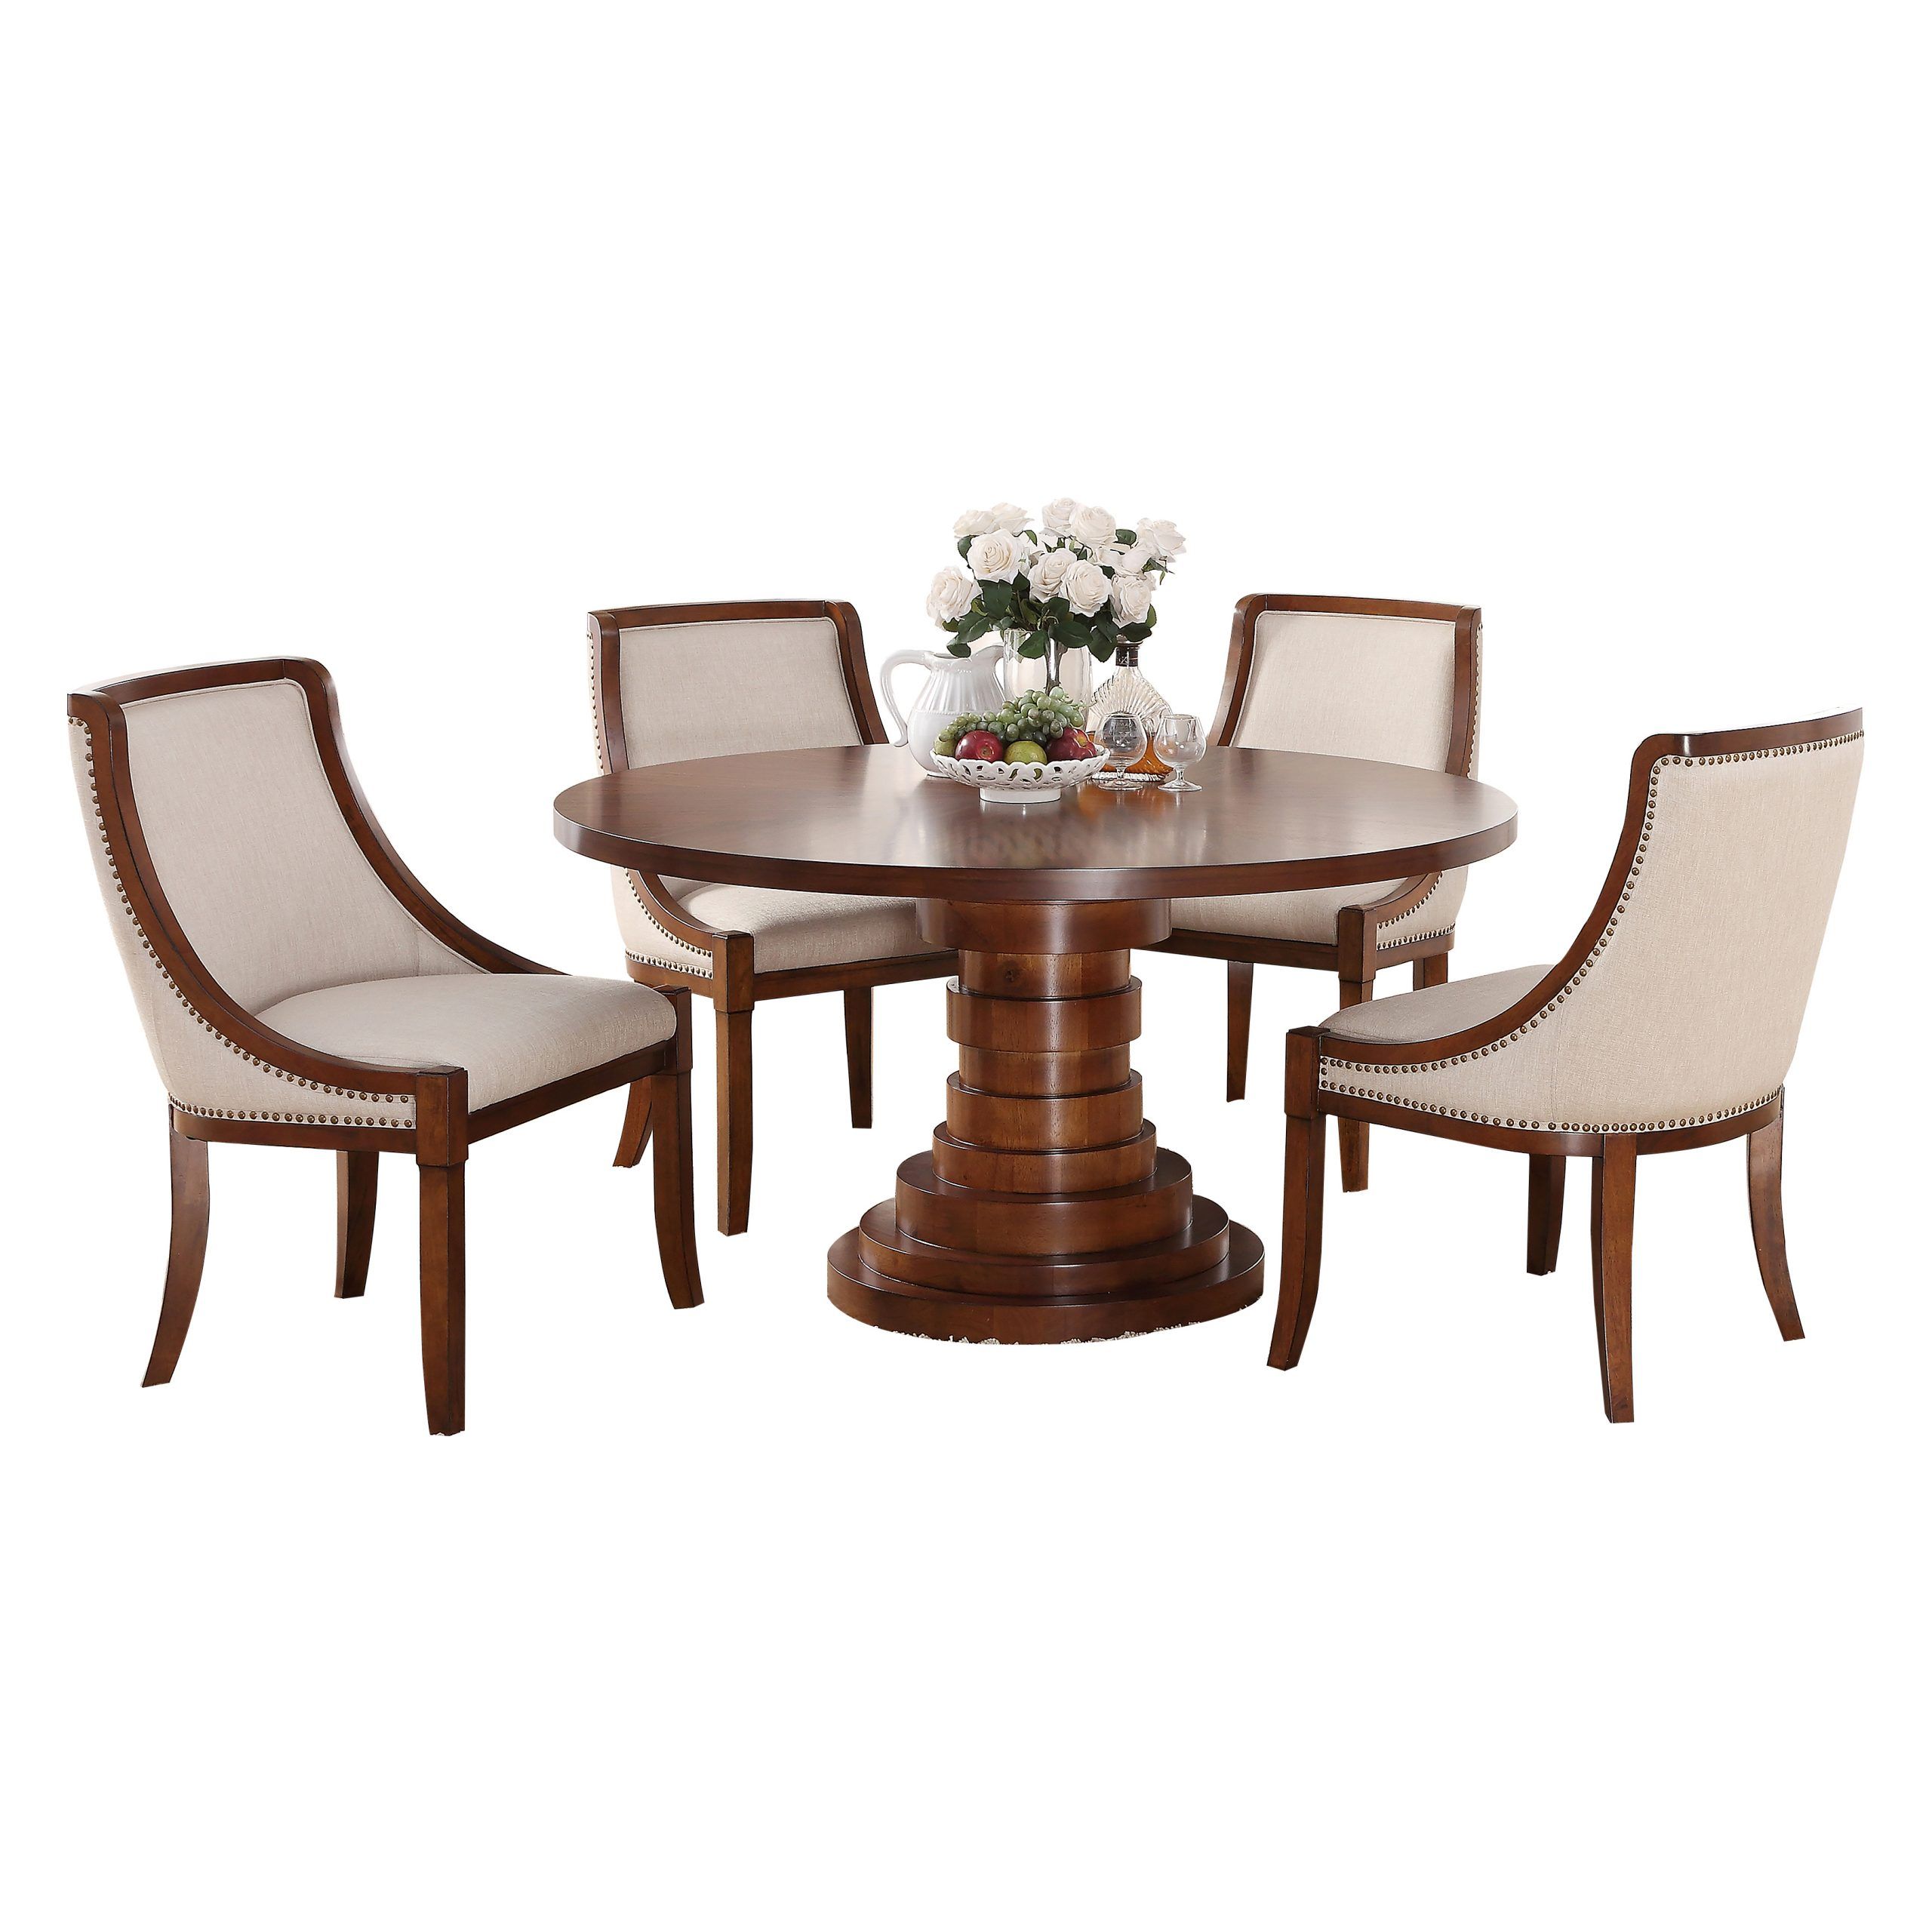 5 Piece Round Dining Sets Pertaining To Widely Used Claire Round 5 Piece Dining Set – Walmart – Walmart (View 8 of 15)